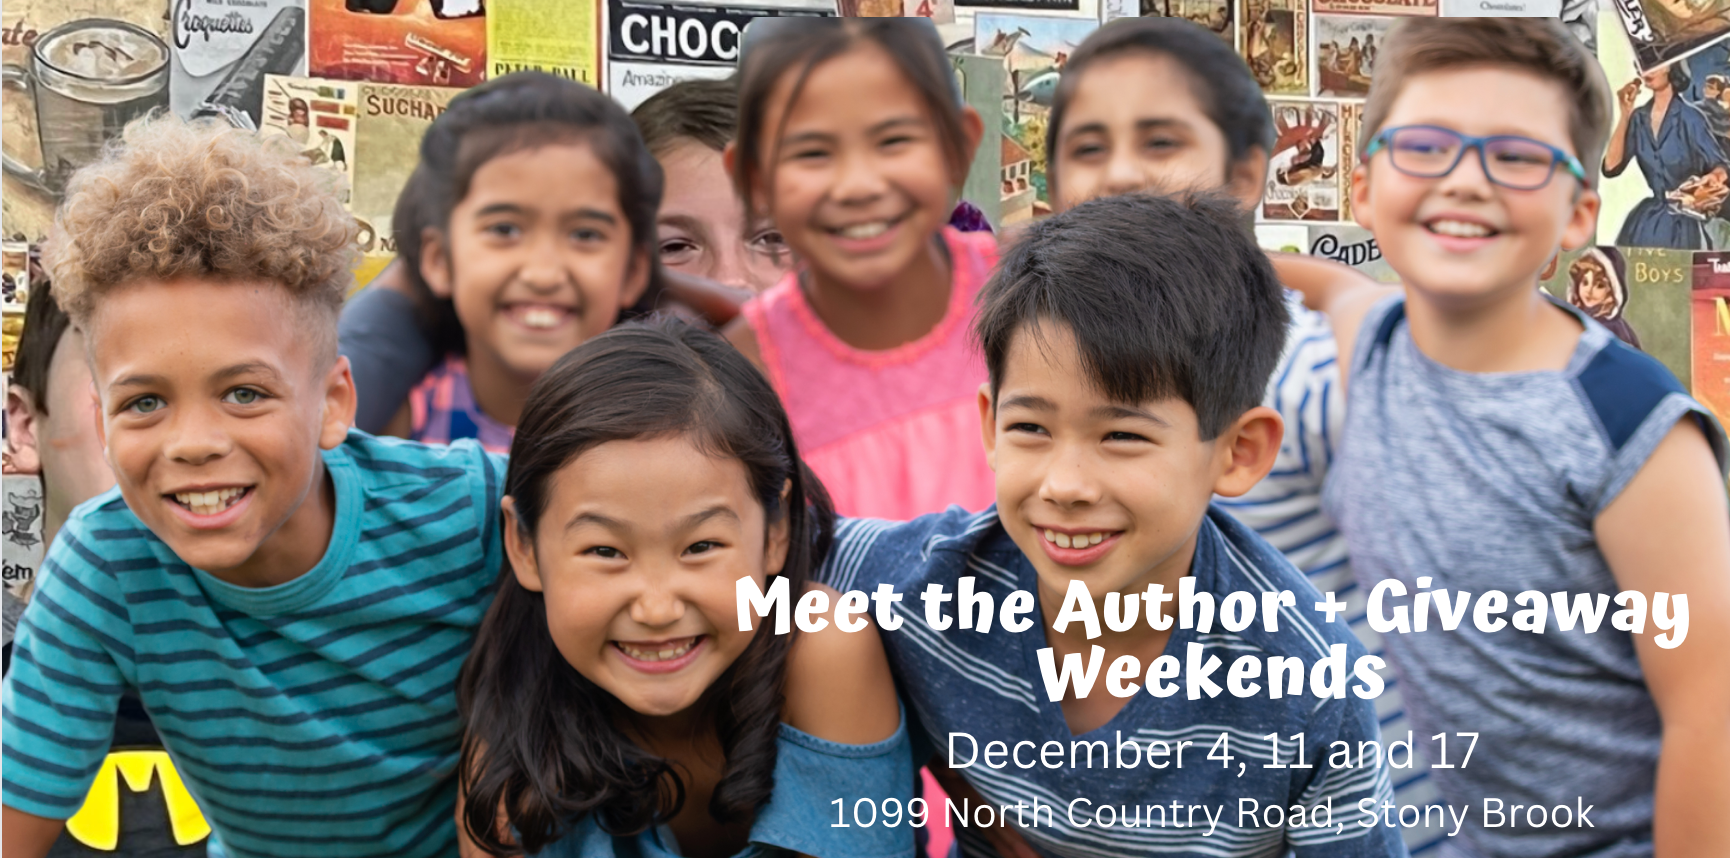 AUTHOR READINGS, BOOK SIGNINGS, & PRIZES!